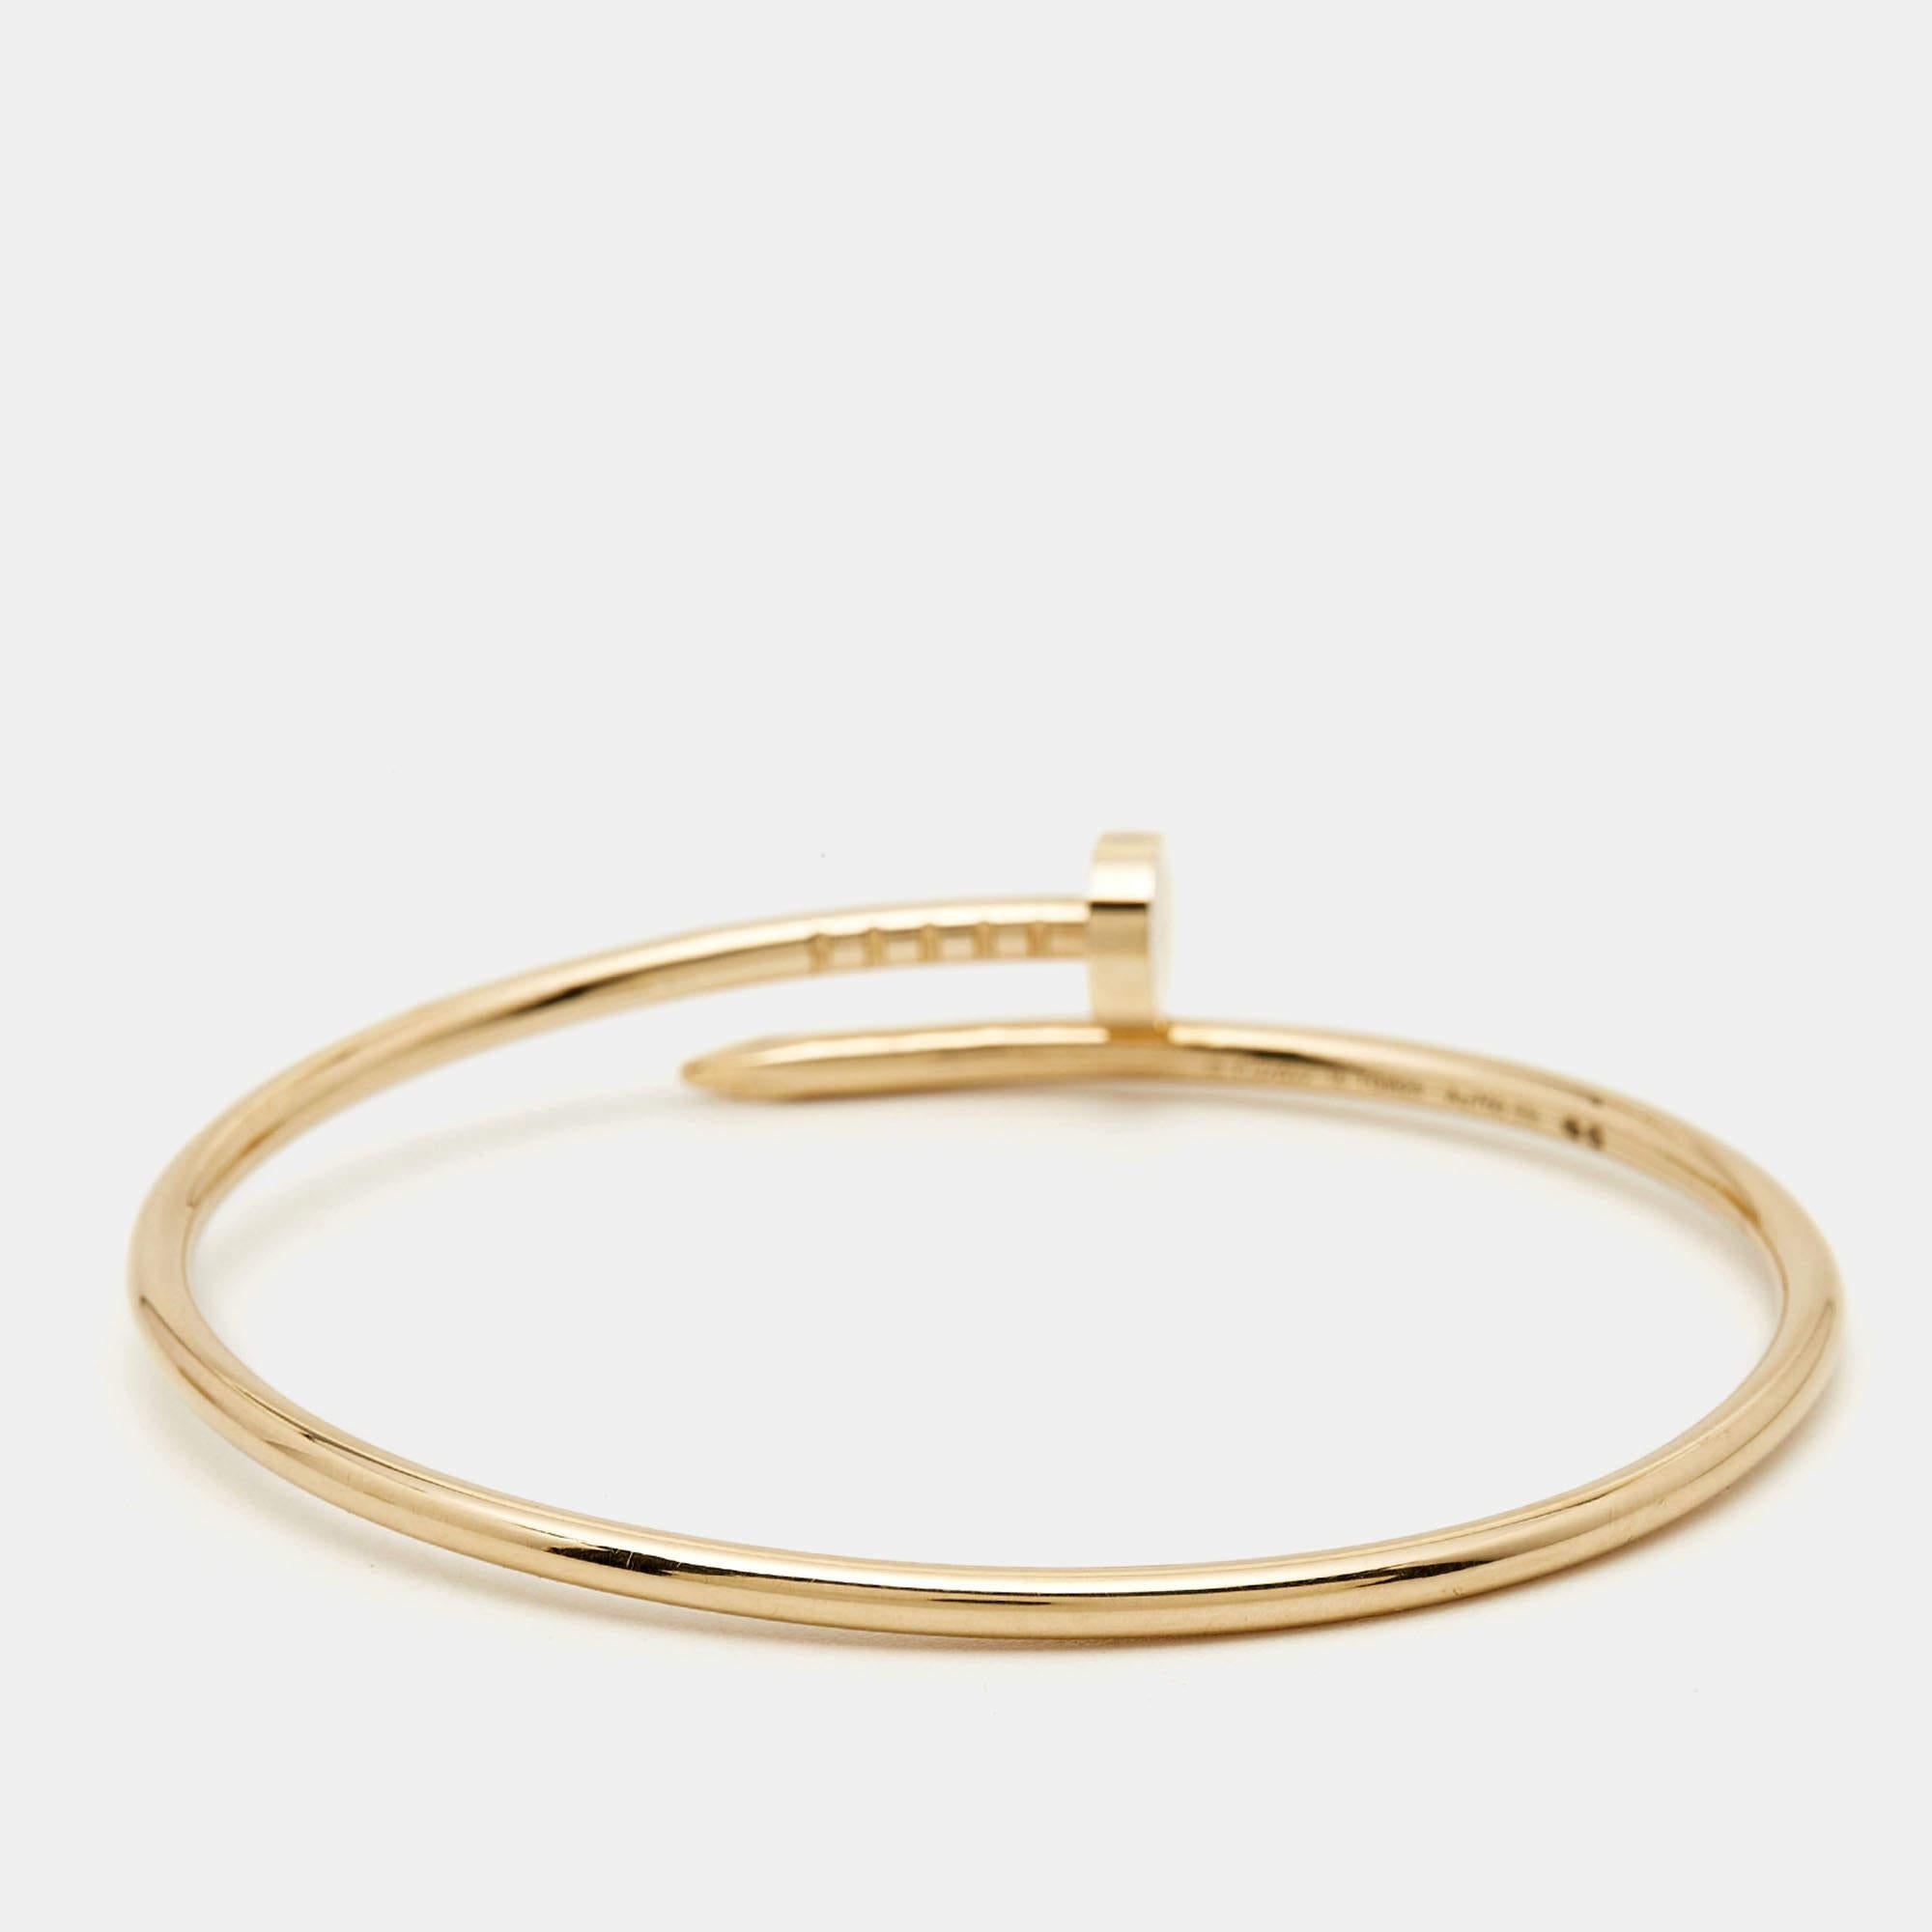 The Cartier Juste Un Clou bracelet is an iconic and luxurious piece of jewelry. Crafted from gleaming 18k yellow gold, its sleek and minimalist design captures the essence of a nail transformed into an elegant and distinctive fashion